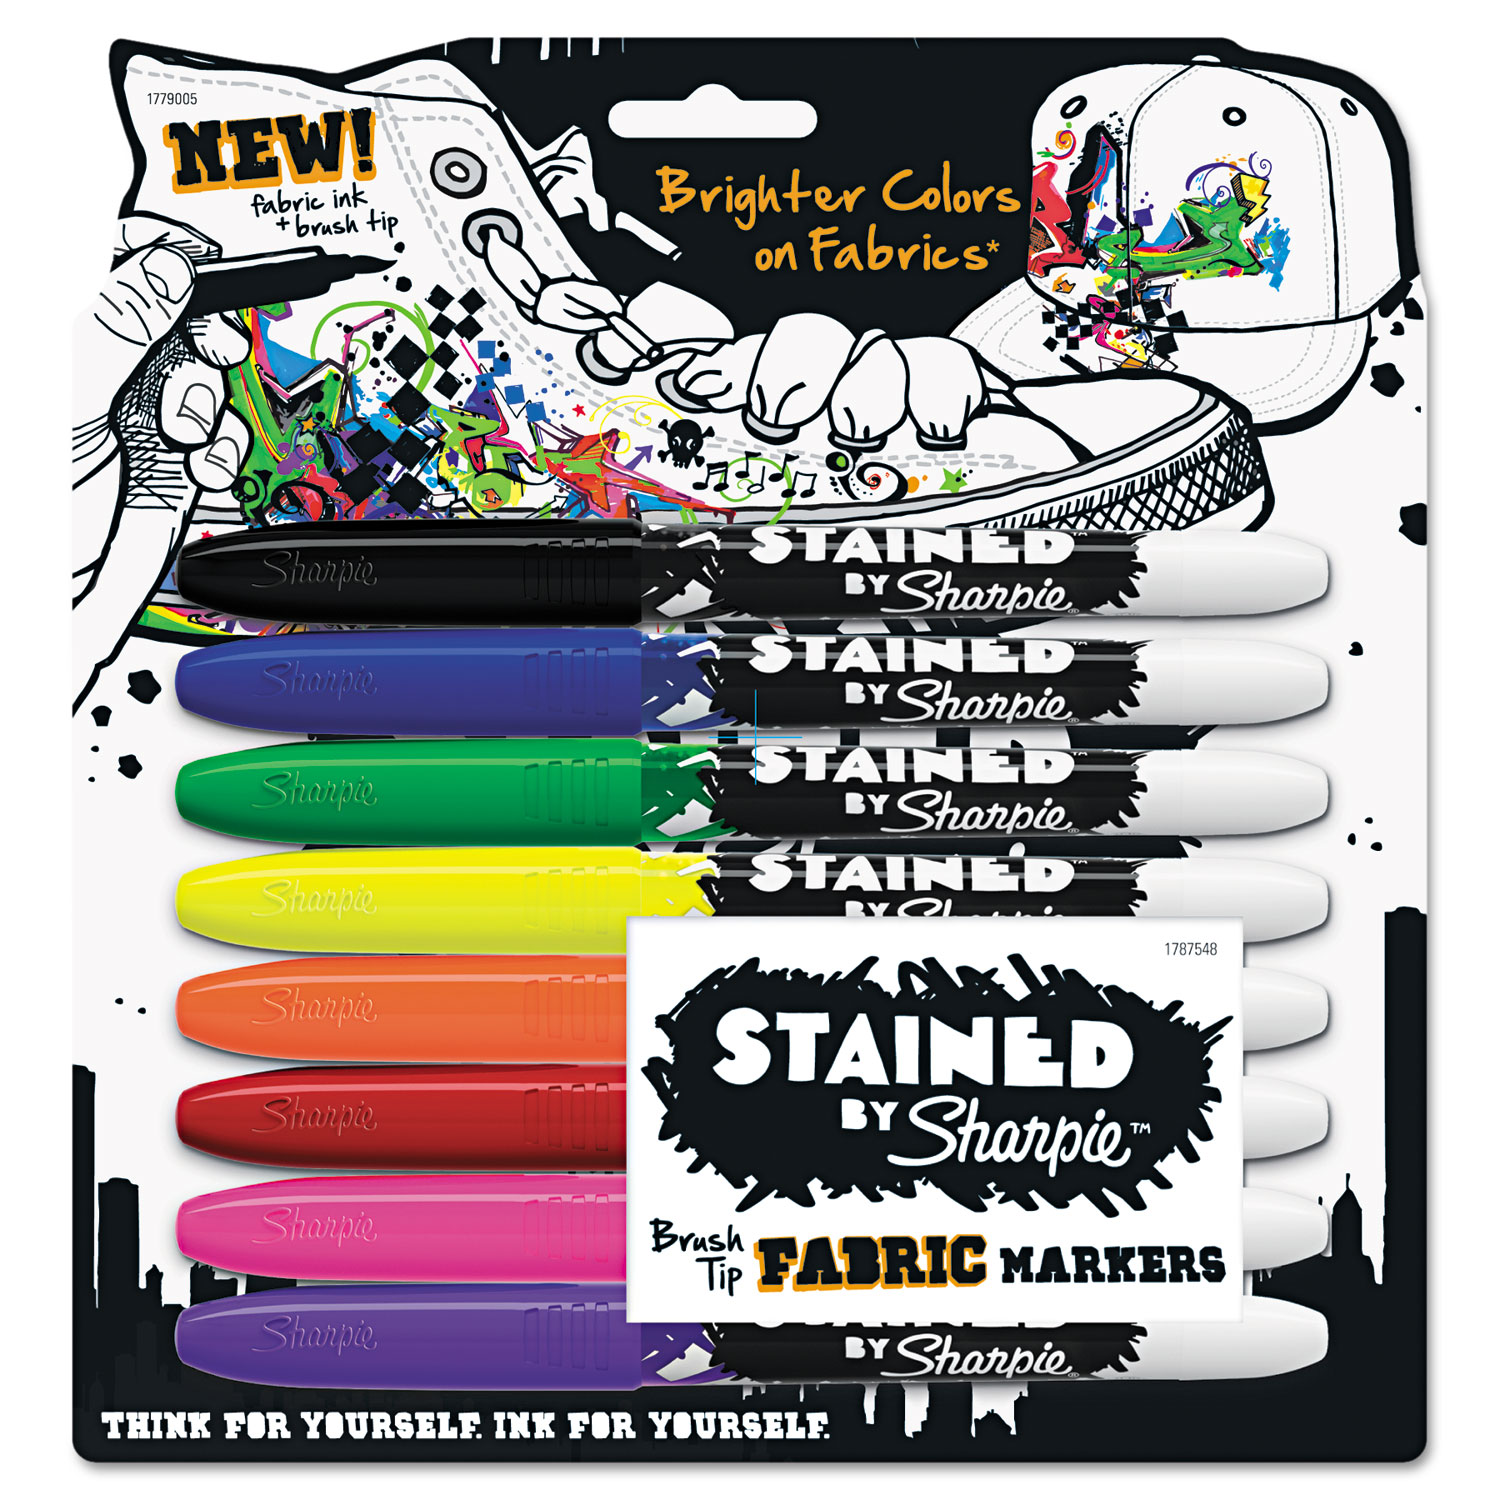  Sharpie 1779005 Stained Fabric Markers, Medium Brush Tip, Assorted Colors, 8/Pack (SAN1779005) 